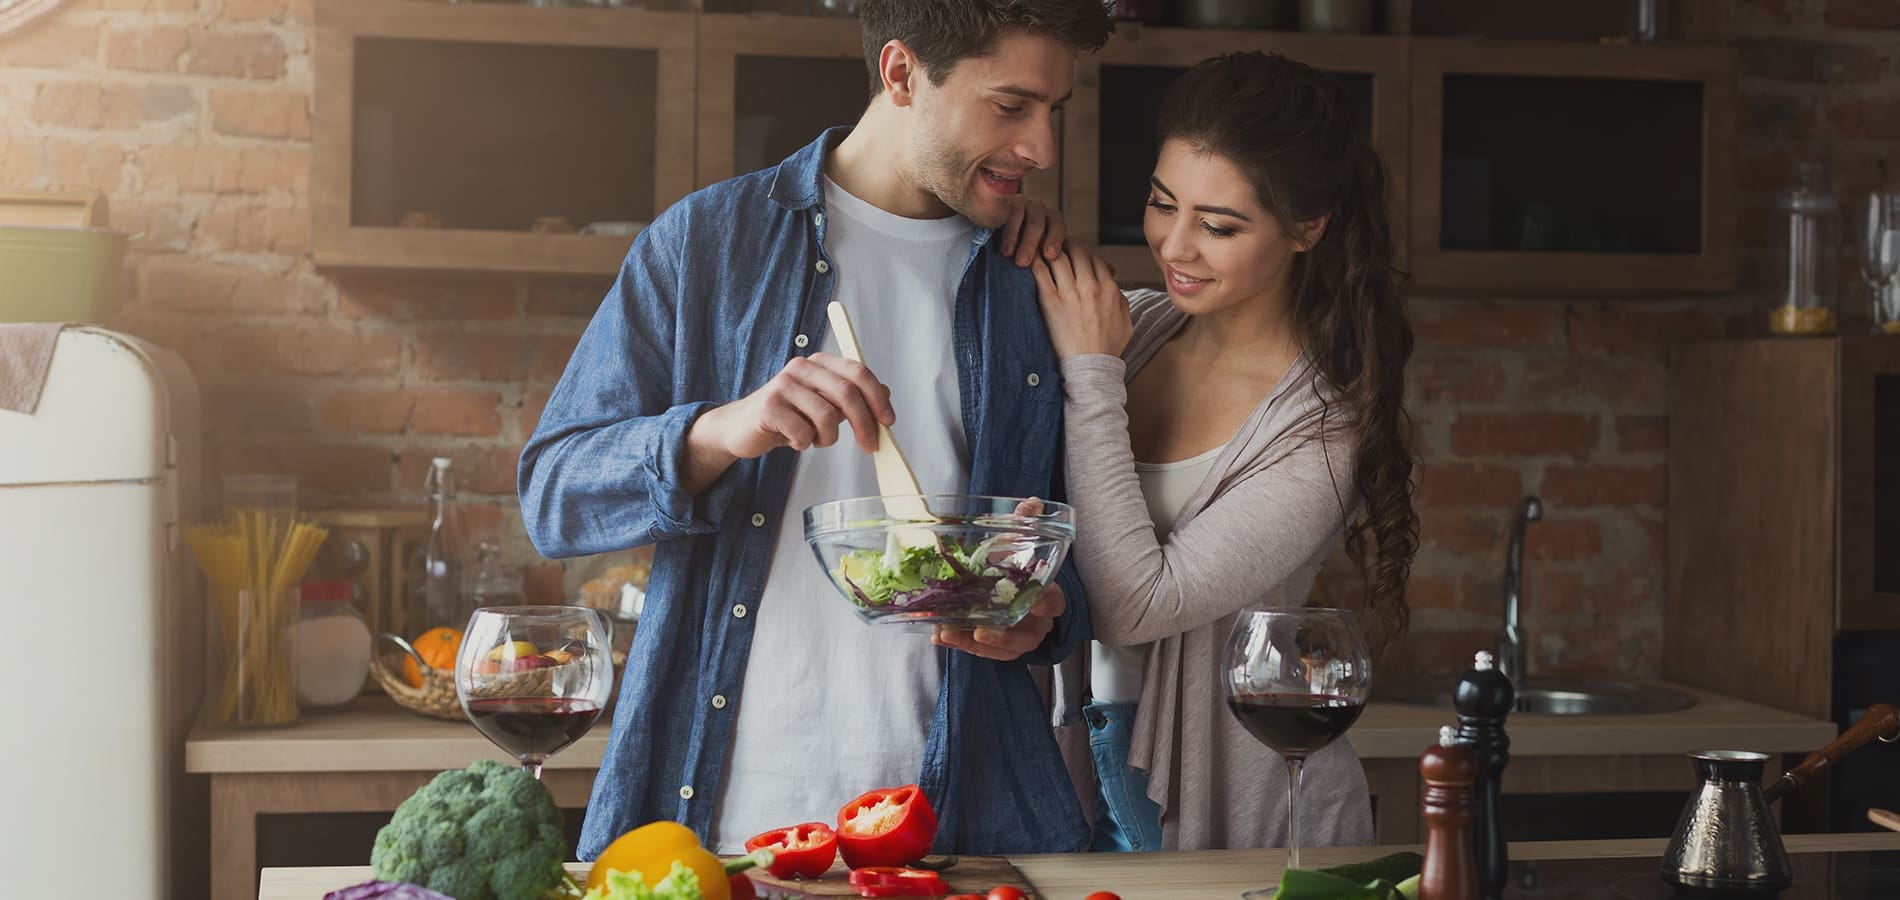 Couple making a healthy salad in the kitchen